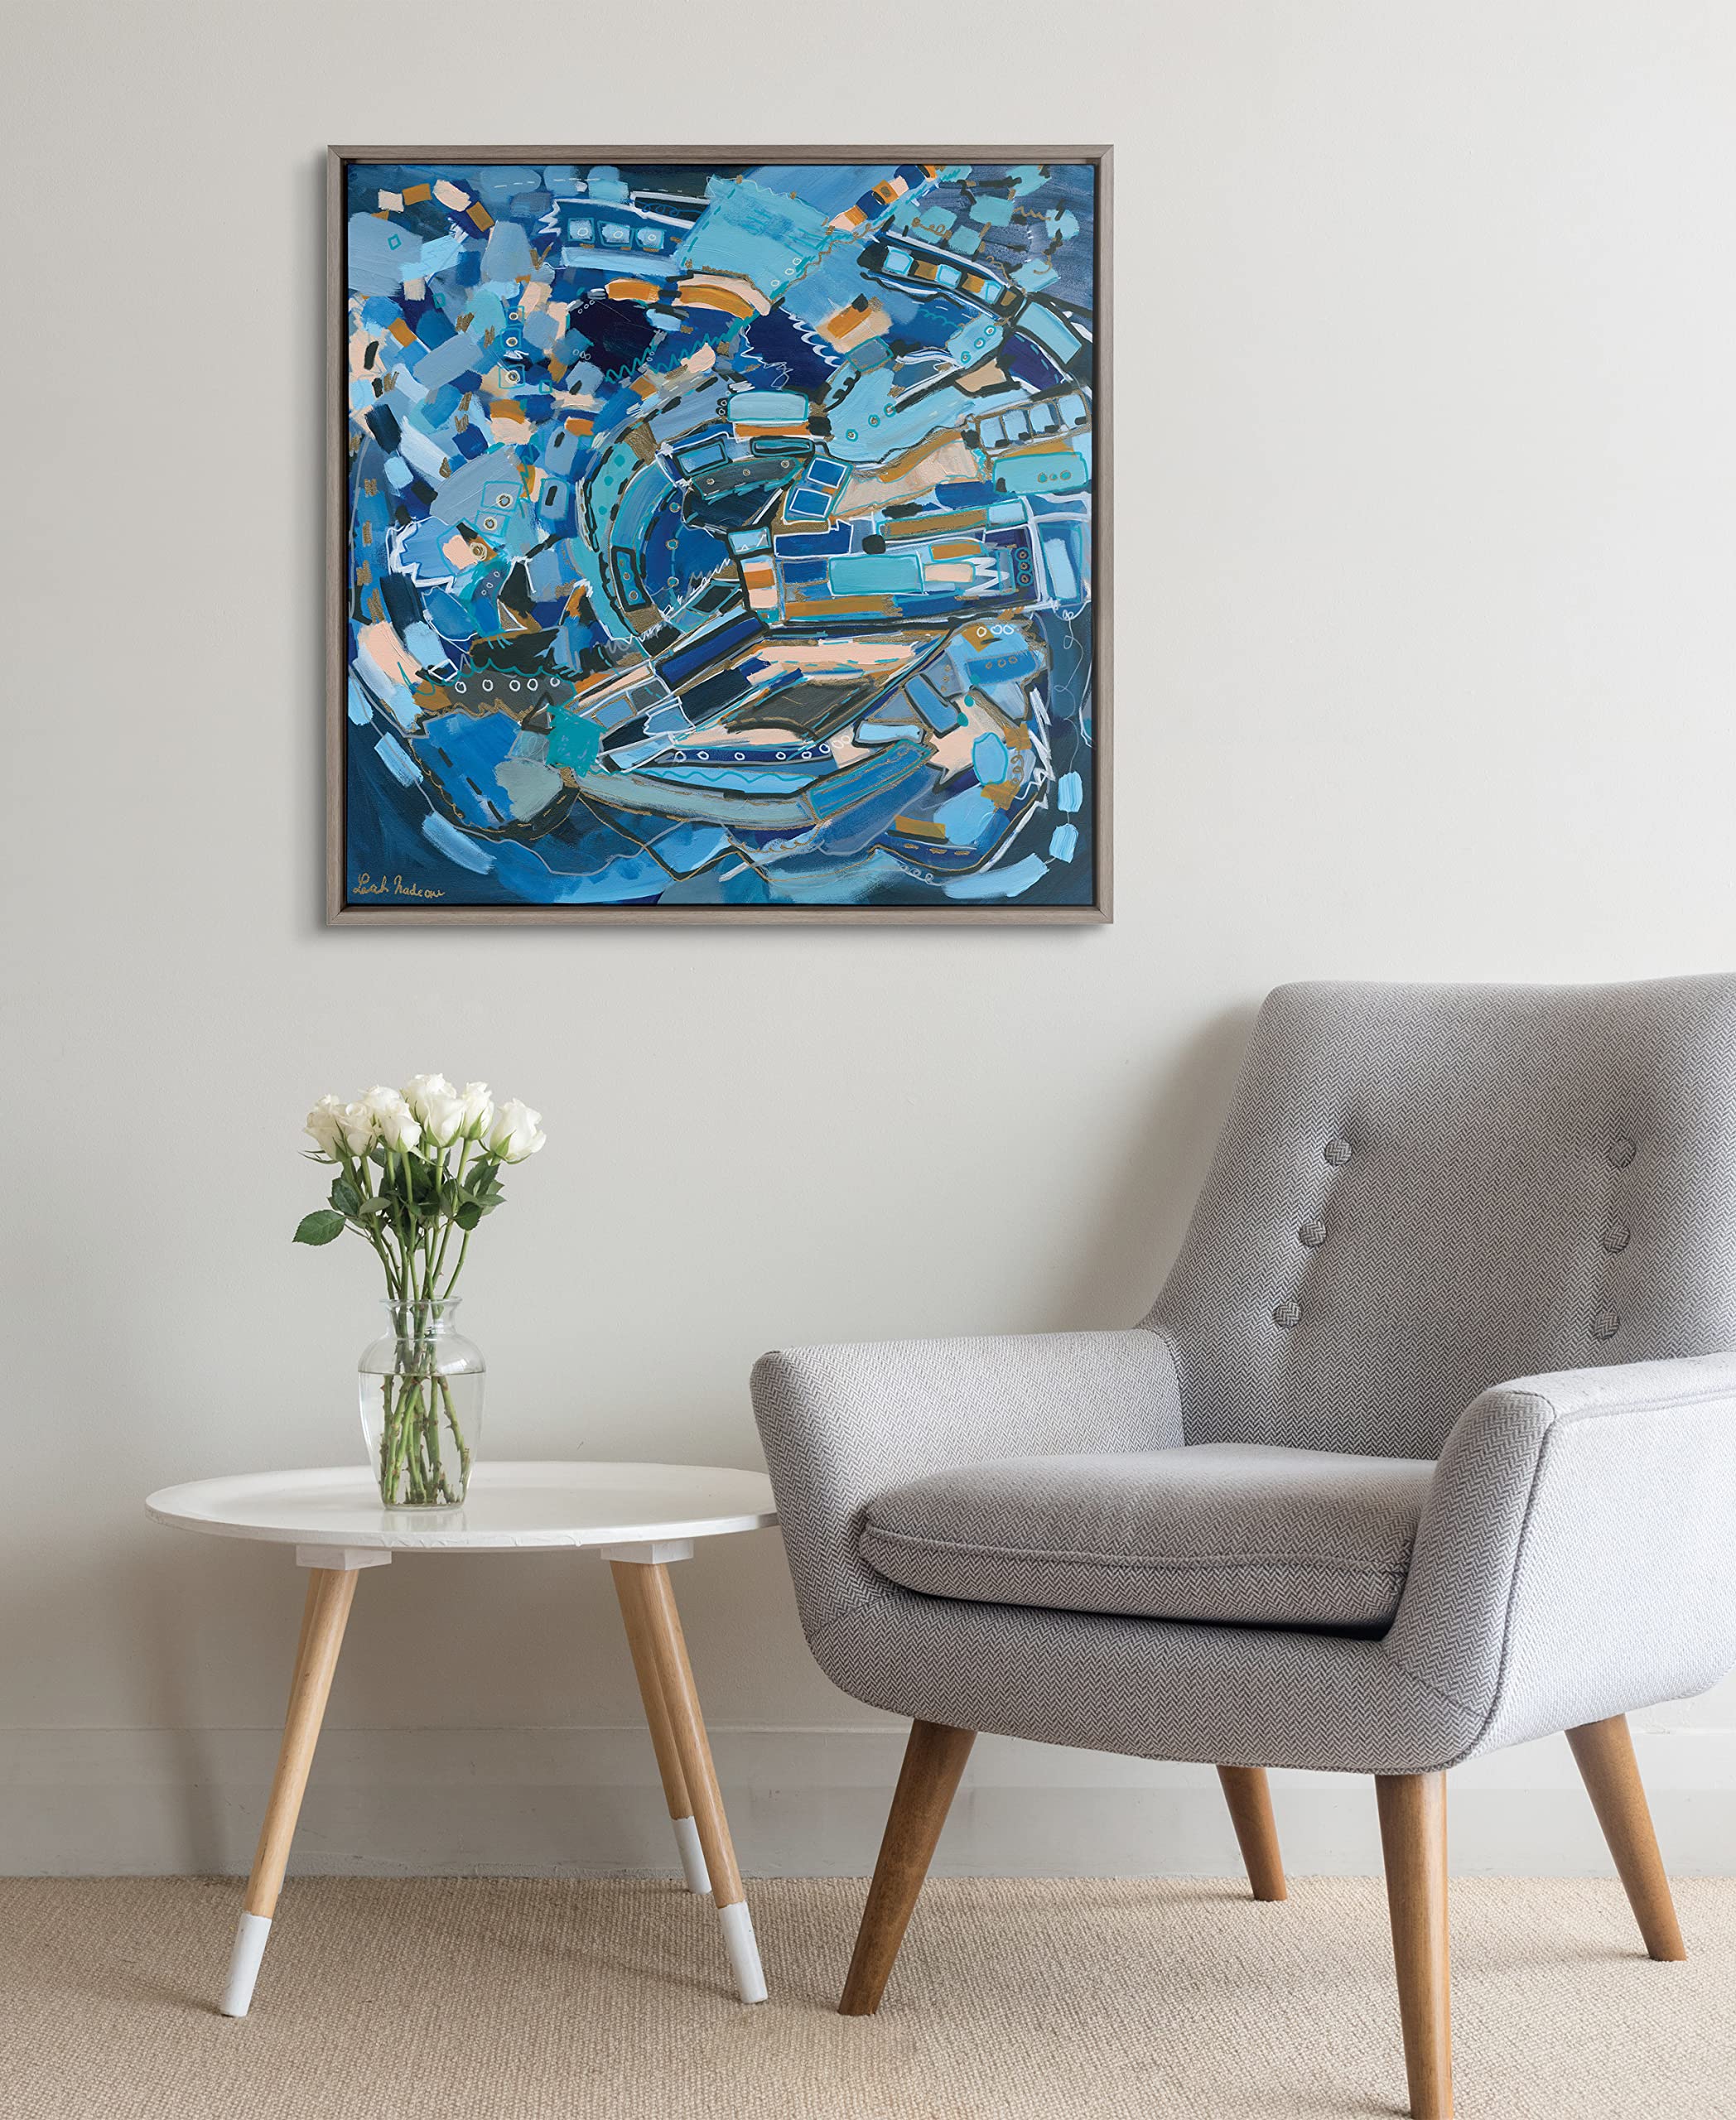 Kate and Laurel Sylvie Blue Dream Framed Canvas Wall Art by Leah Nadeau, 30x30 Gray, Decorative Abstract Art Print for Wall